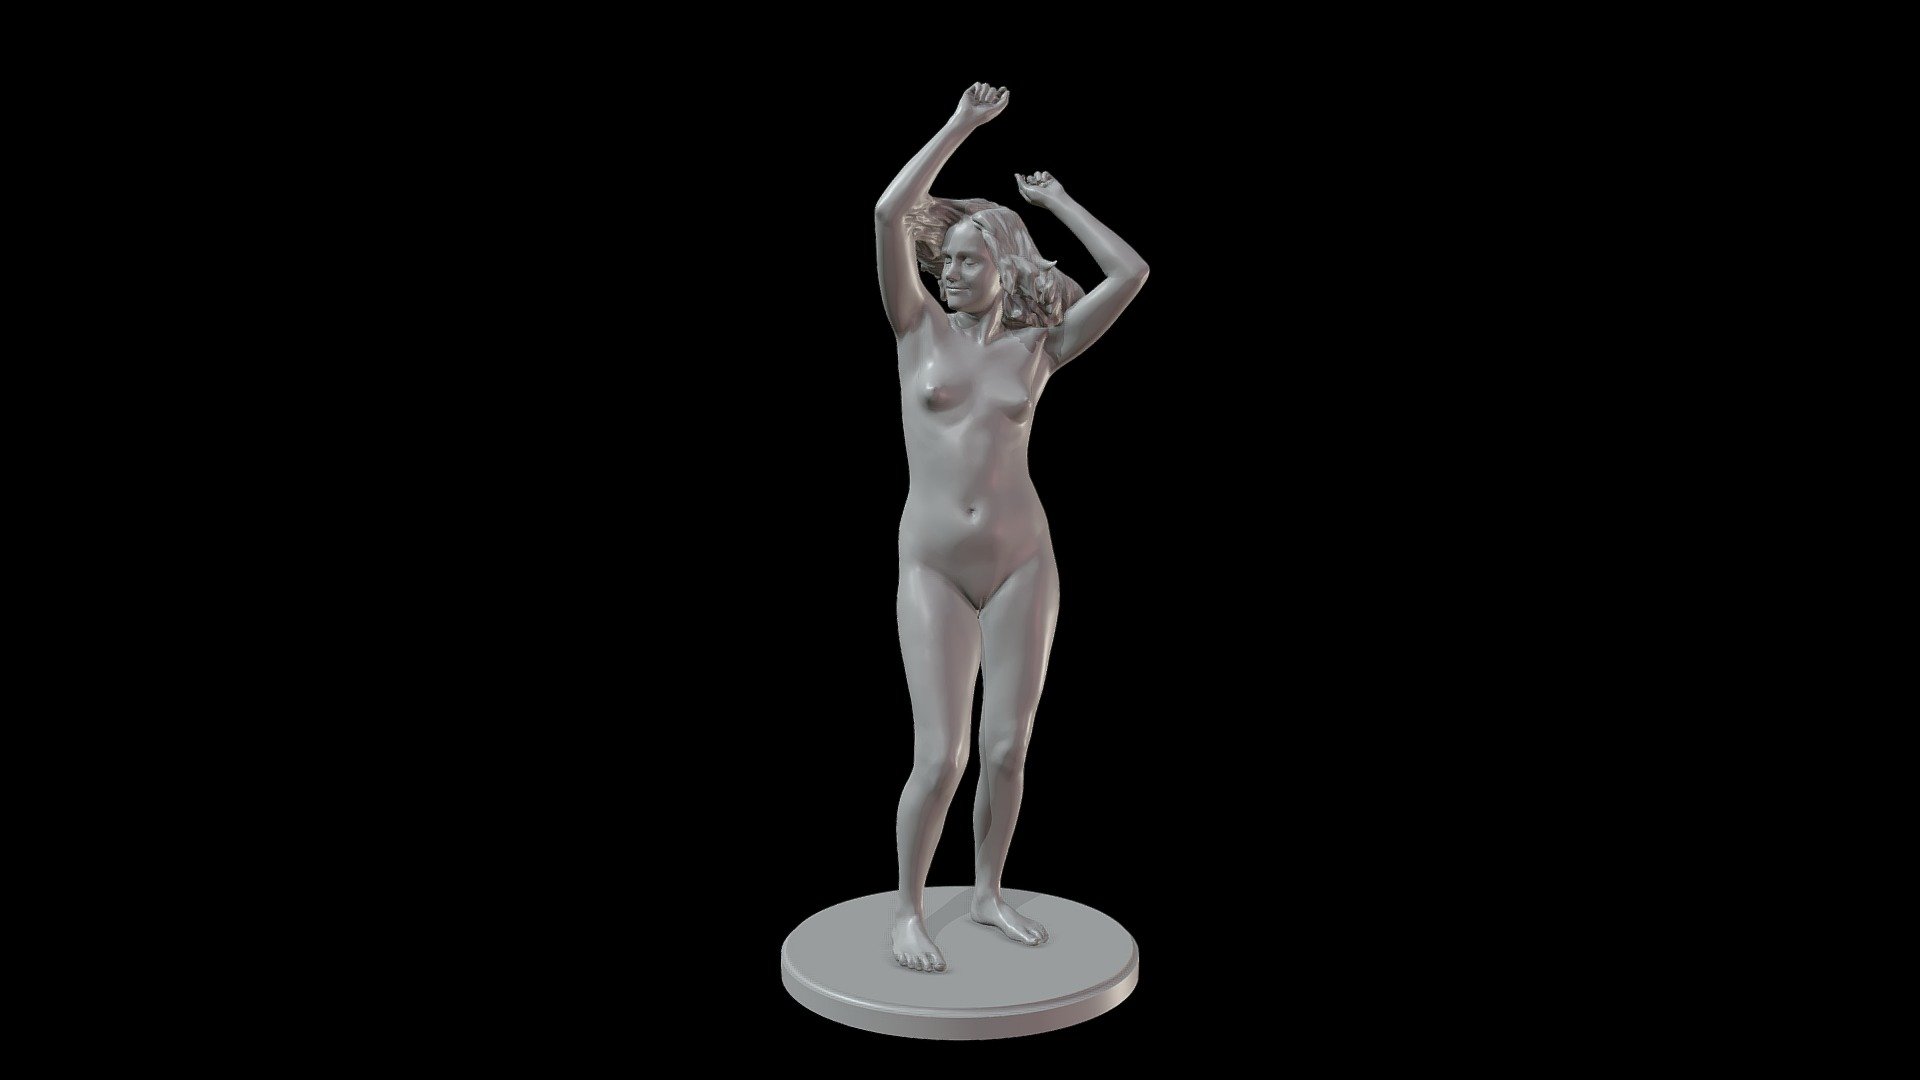 Eve 01-005 - Figurine version
Beautiful model in action pose.

Other models and poses at another-gallery

This model has been scanned by  another-me.fr - Eve 01-005 - Figurine - 3D model by Another-me (@fredlucazeau) 3d model